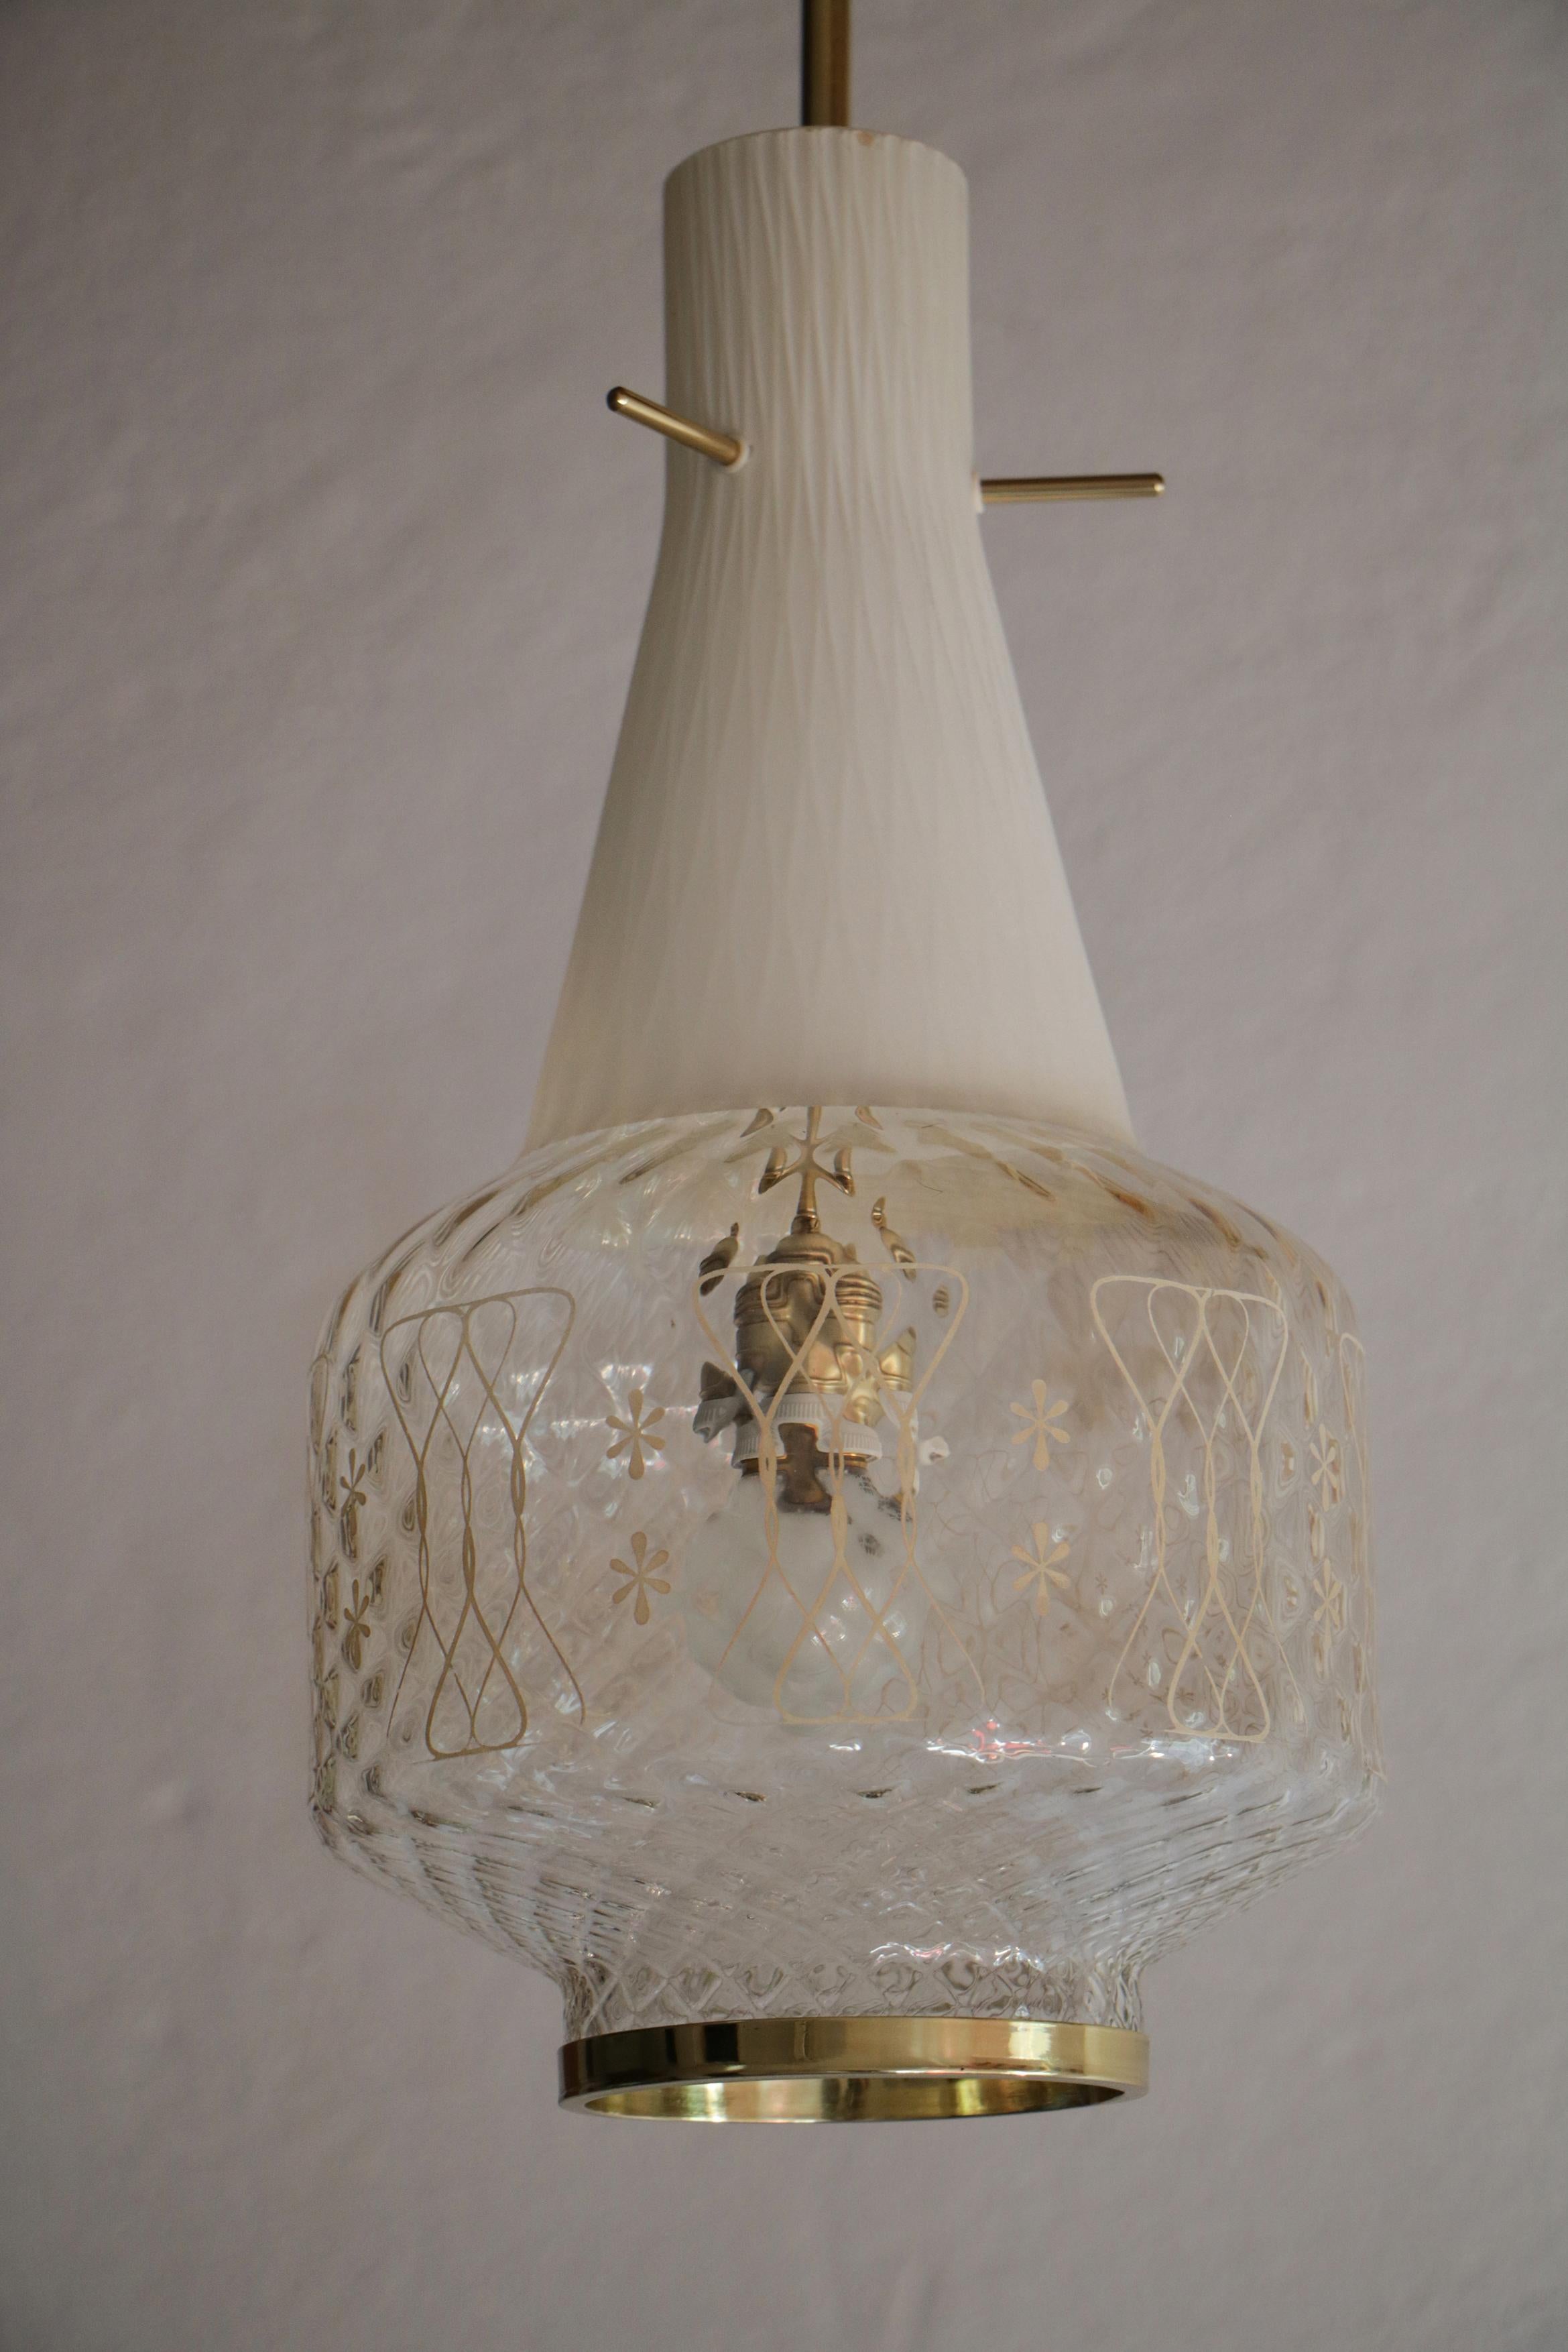 Mid-20th Century Italian Art Deco Decorative and Satin Glass Hanging Lamp, 1950s For Sale